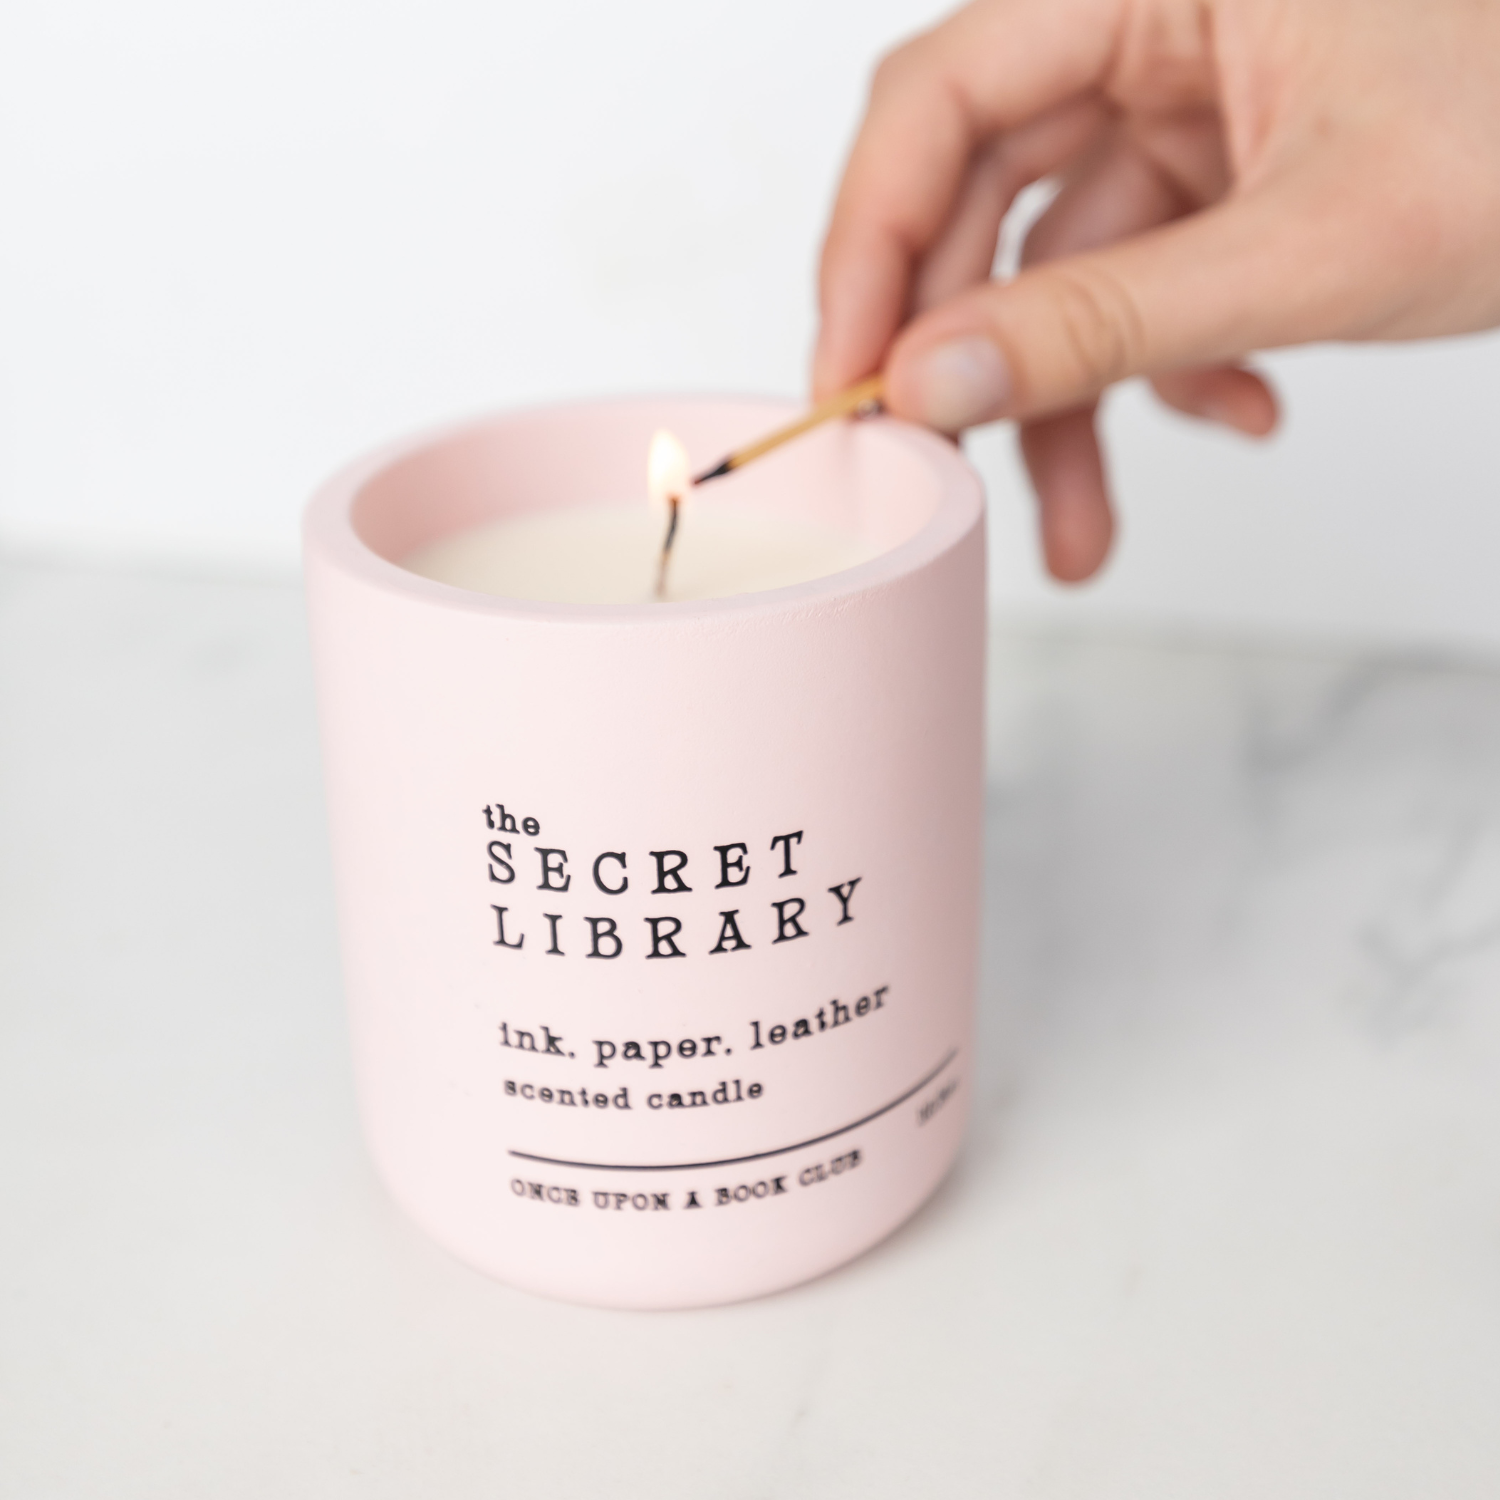 A white hand holding a match lights a candle. The candle is a pale pink with black text at the front that says The Secret Library, ink,paper,leather scented candle